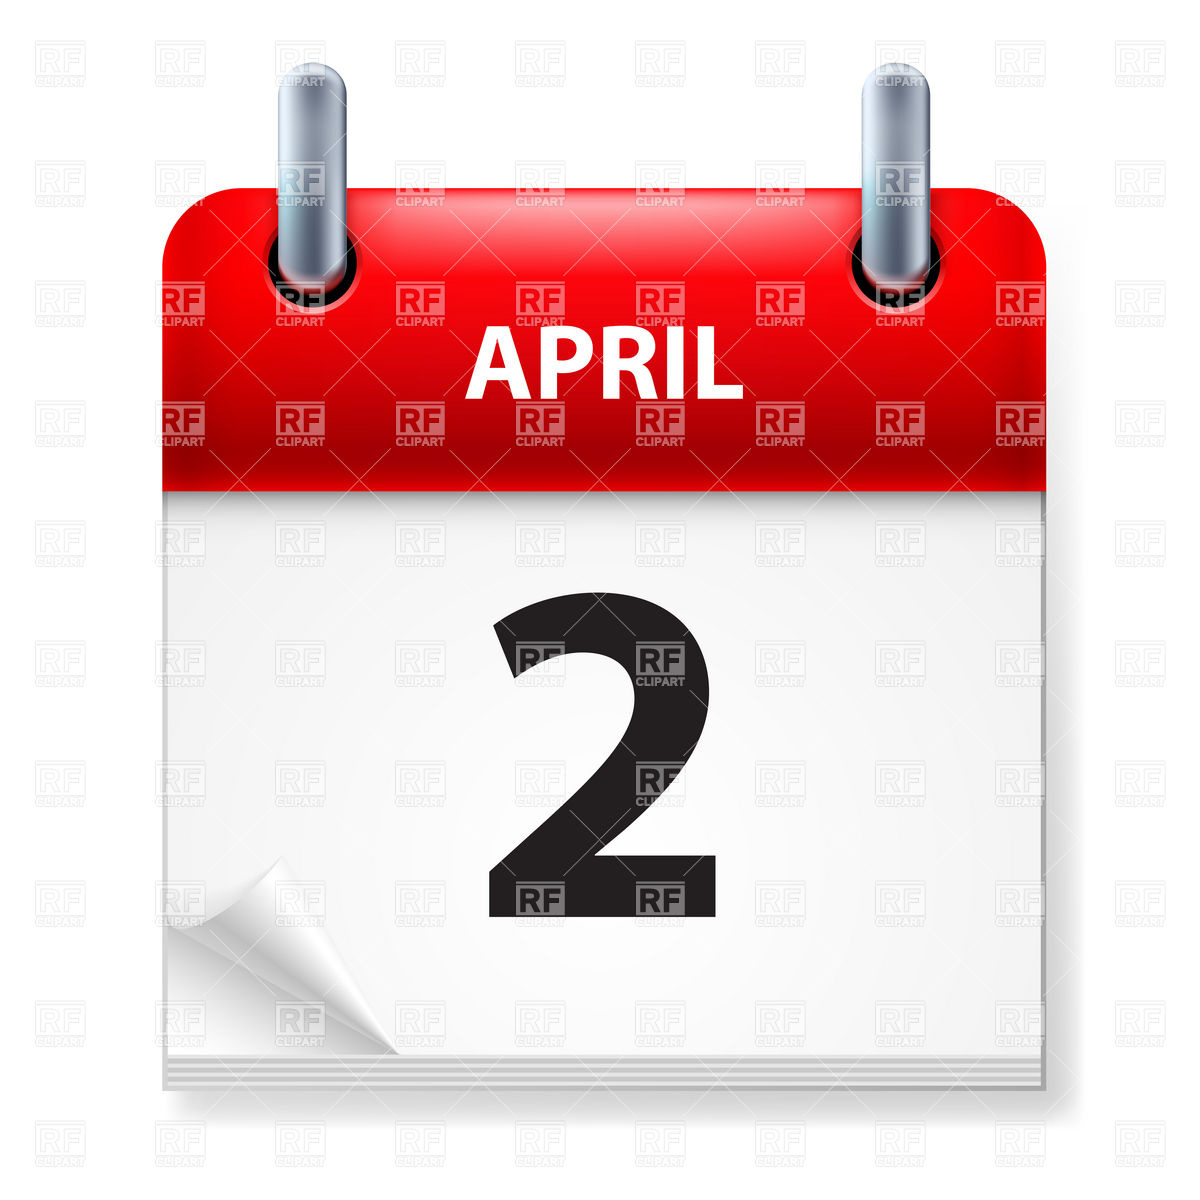 Calendar Icon   2 Of April 7296 Calendars Layouts Download Royalty